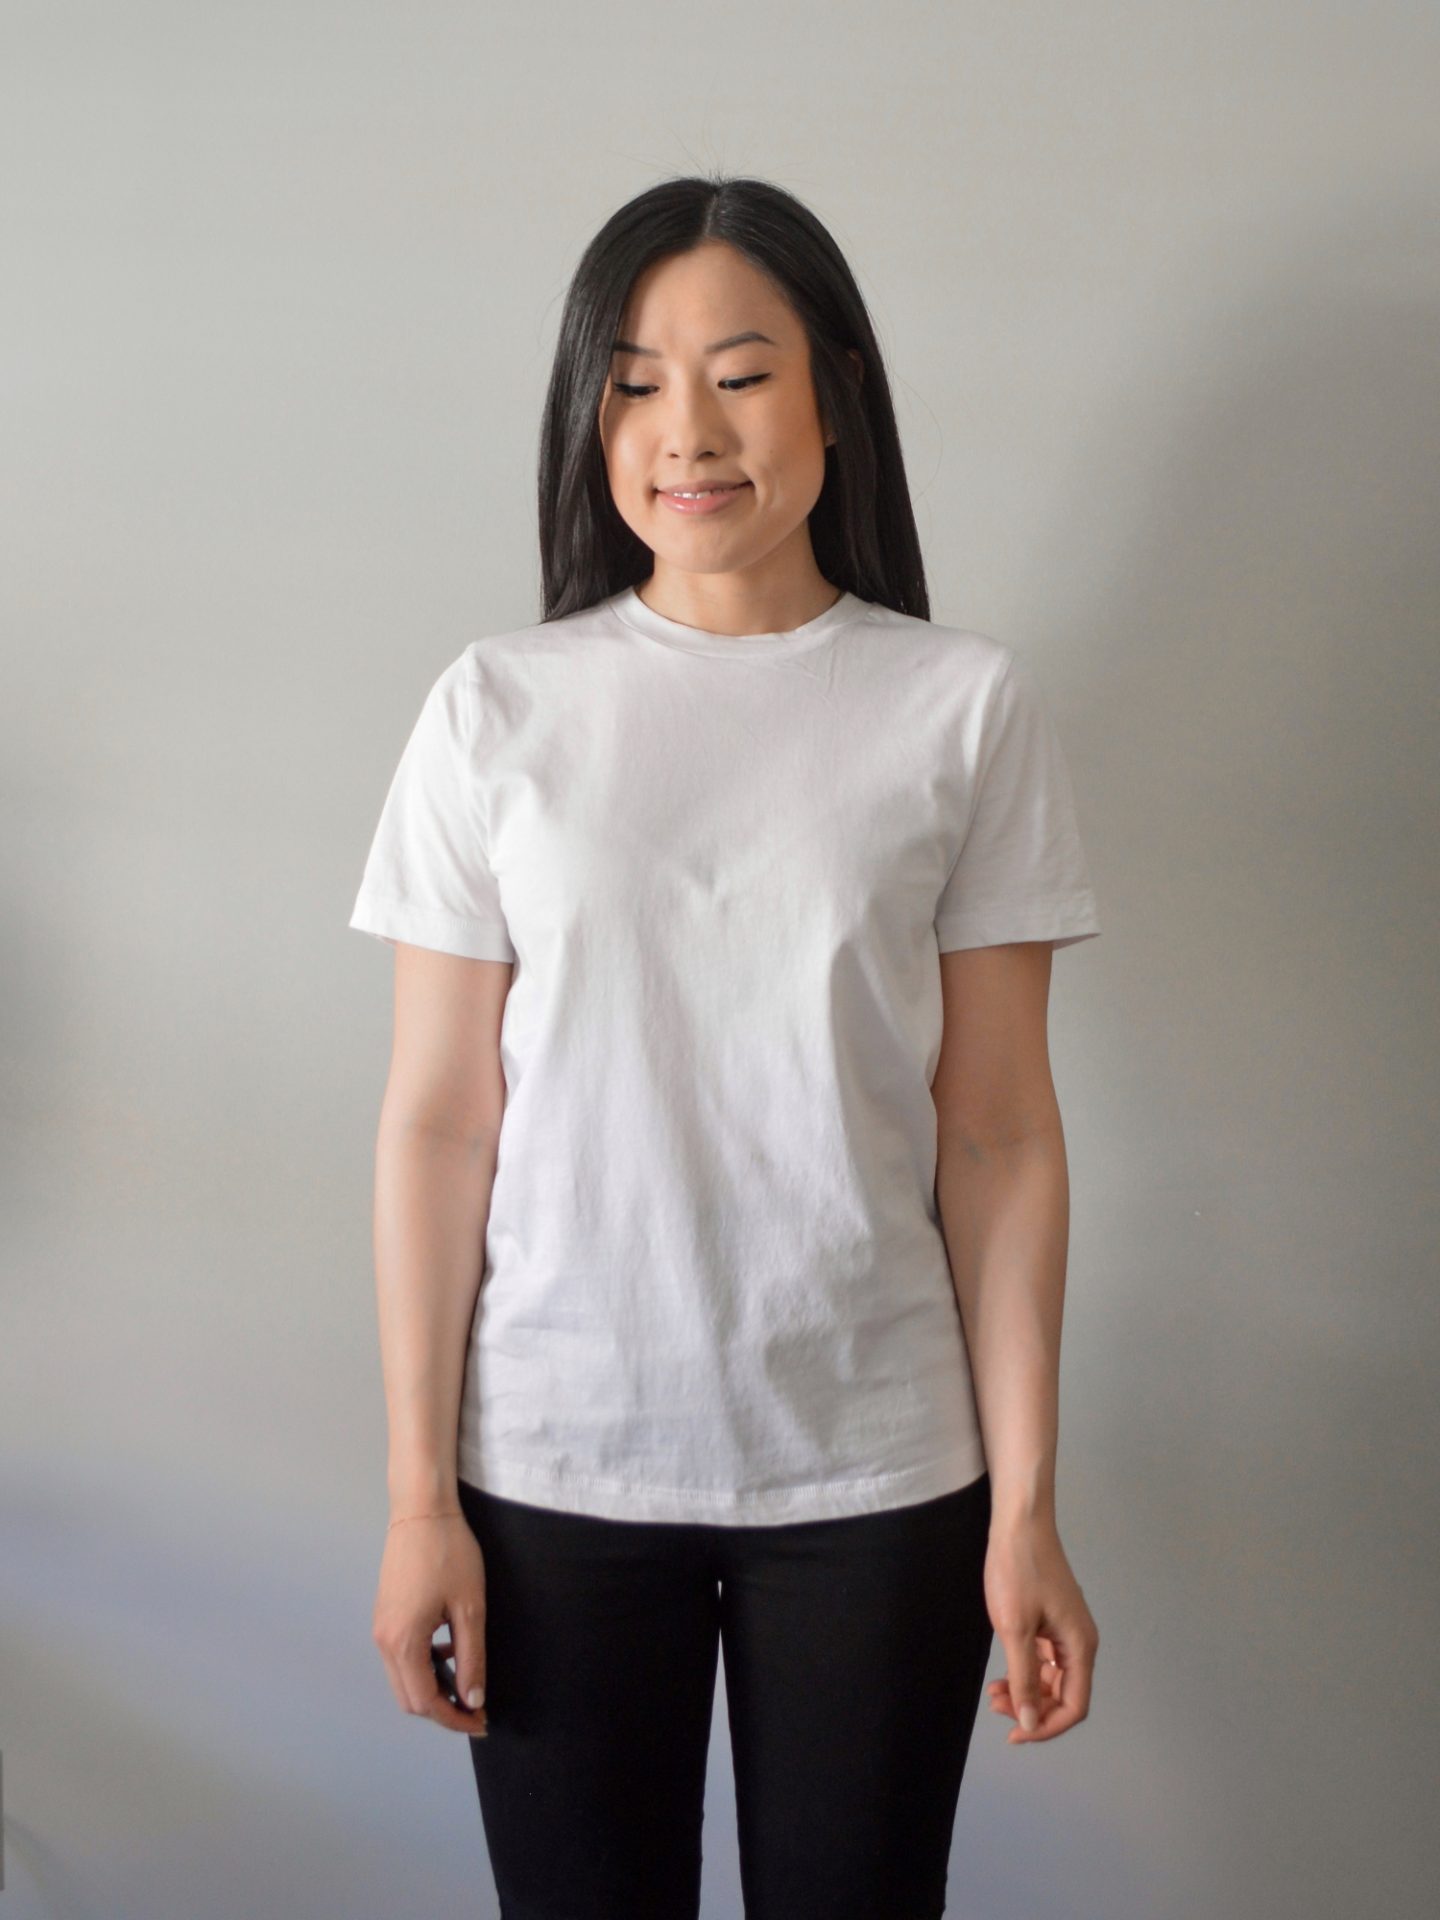 Wearing - Frank and Oak The Good Cotton Essential T-Shirt in Bright White